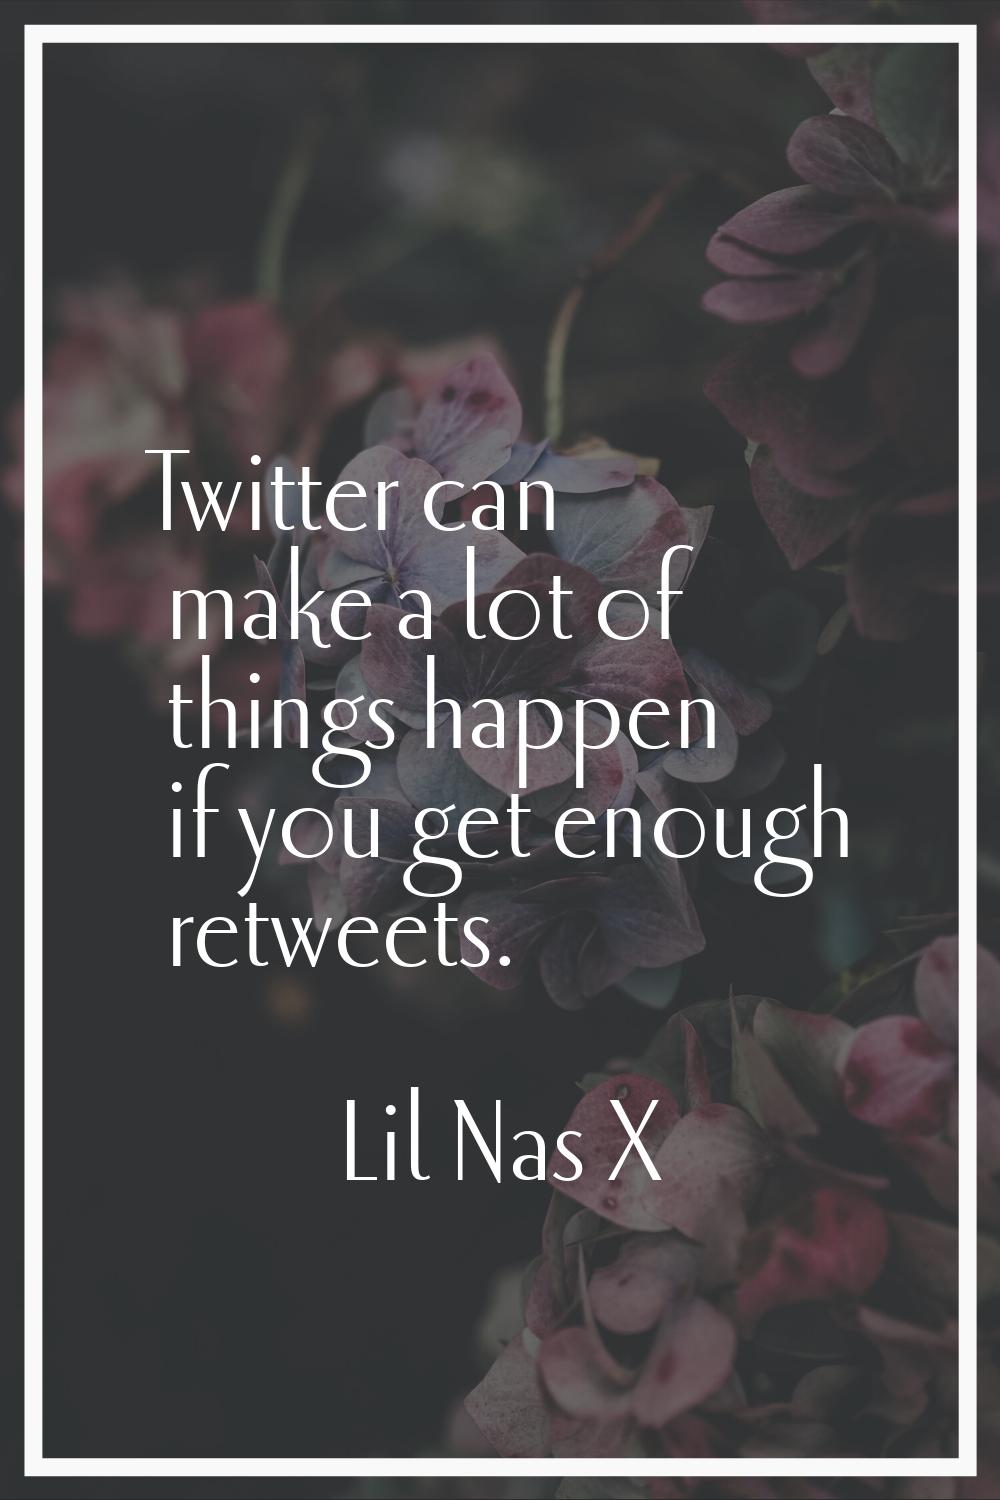 Twitter can make a lot of things happen if you get enough retweets.